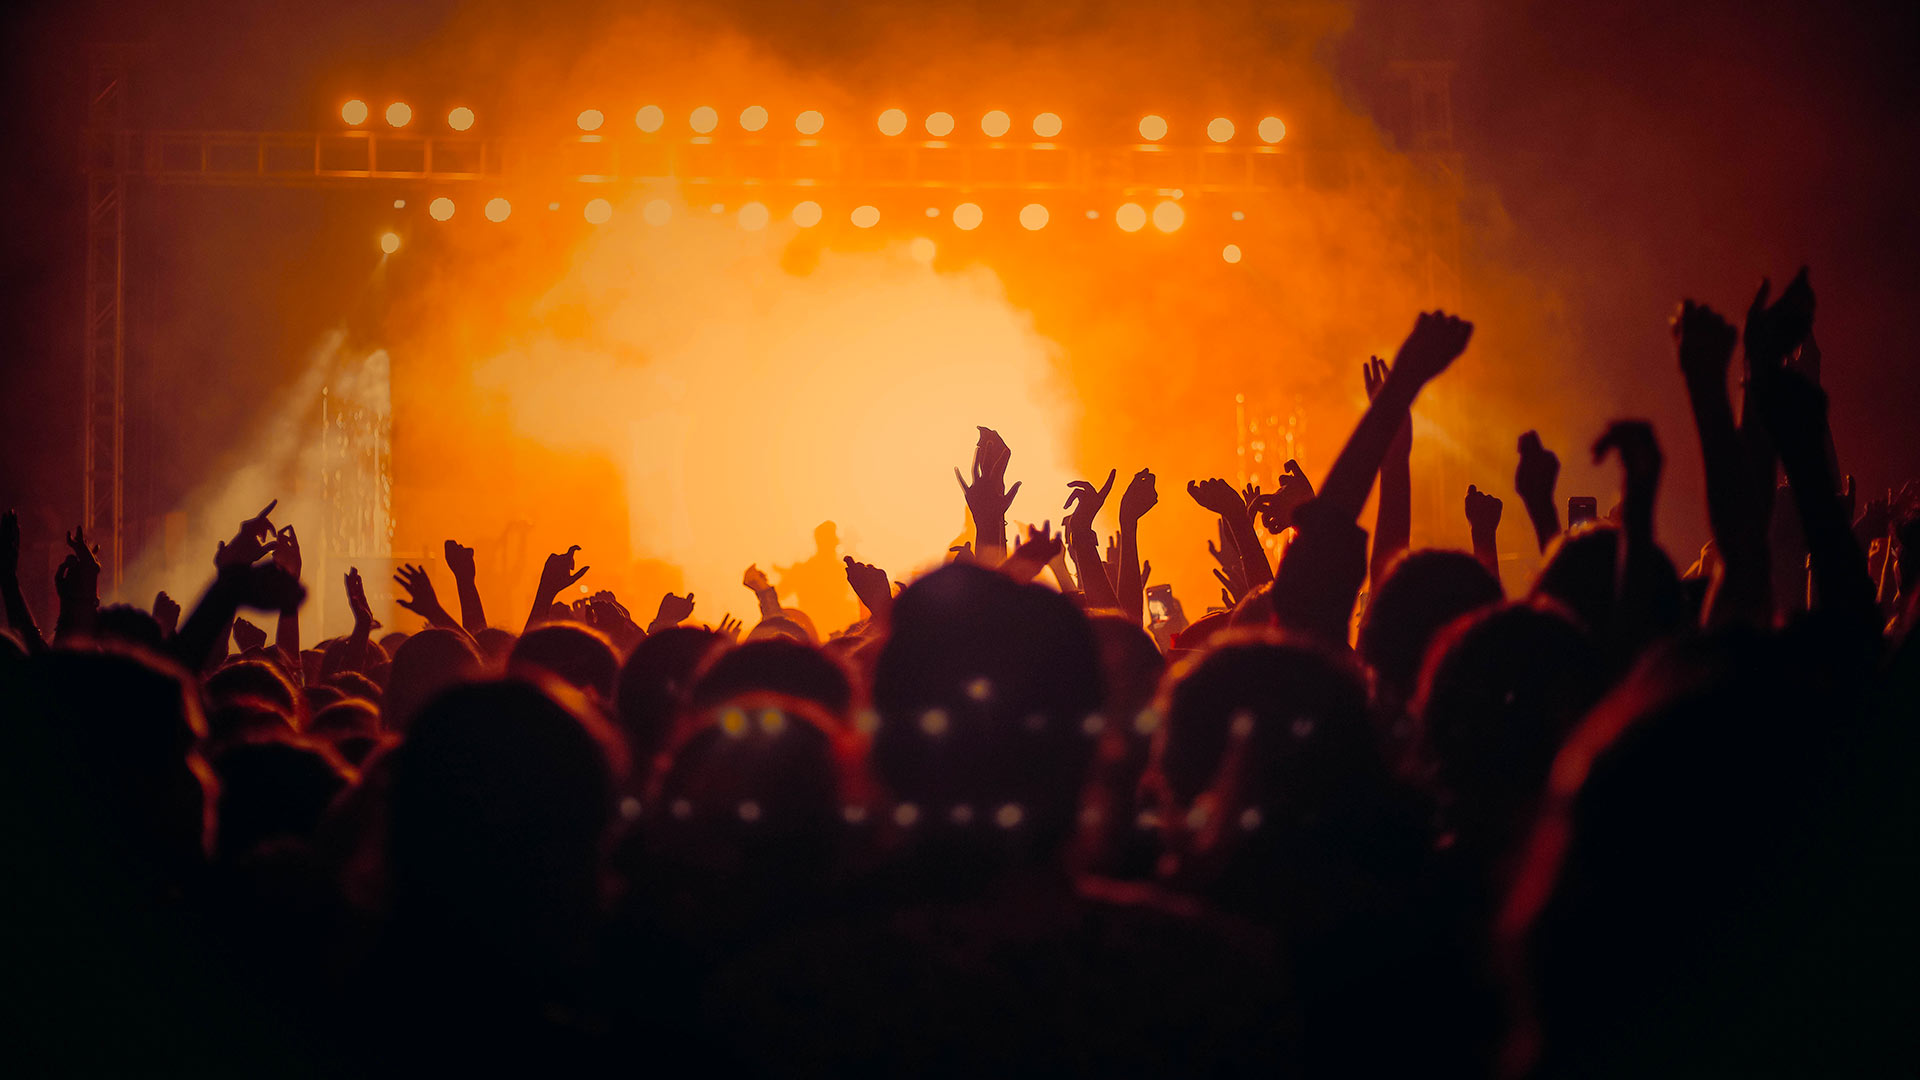 Start the route with the best music festivals